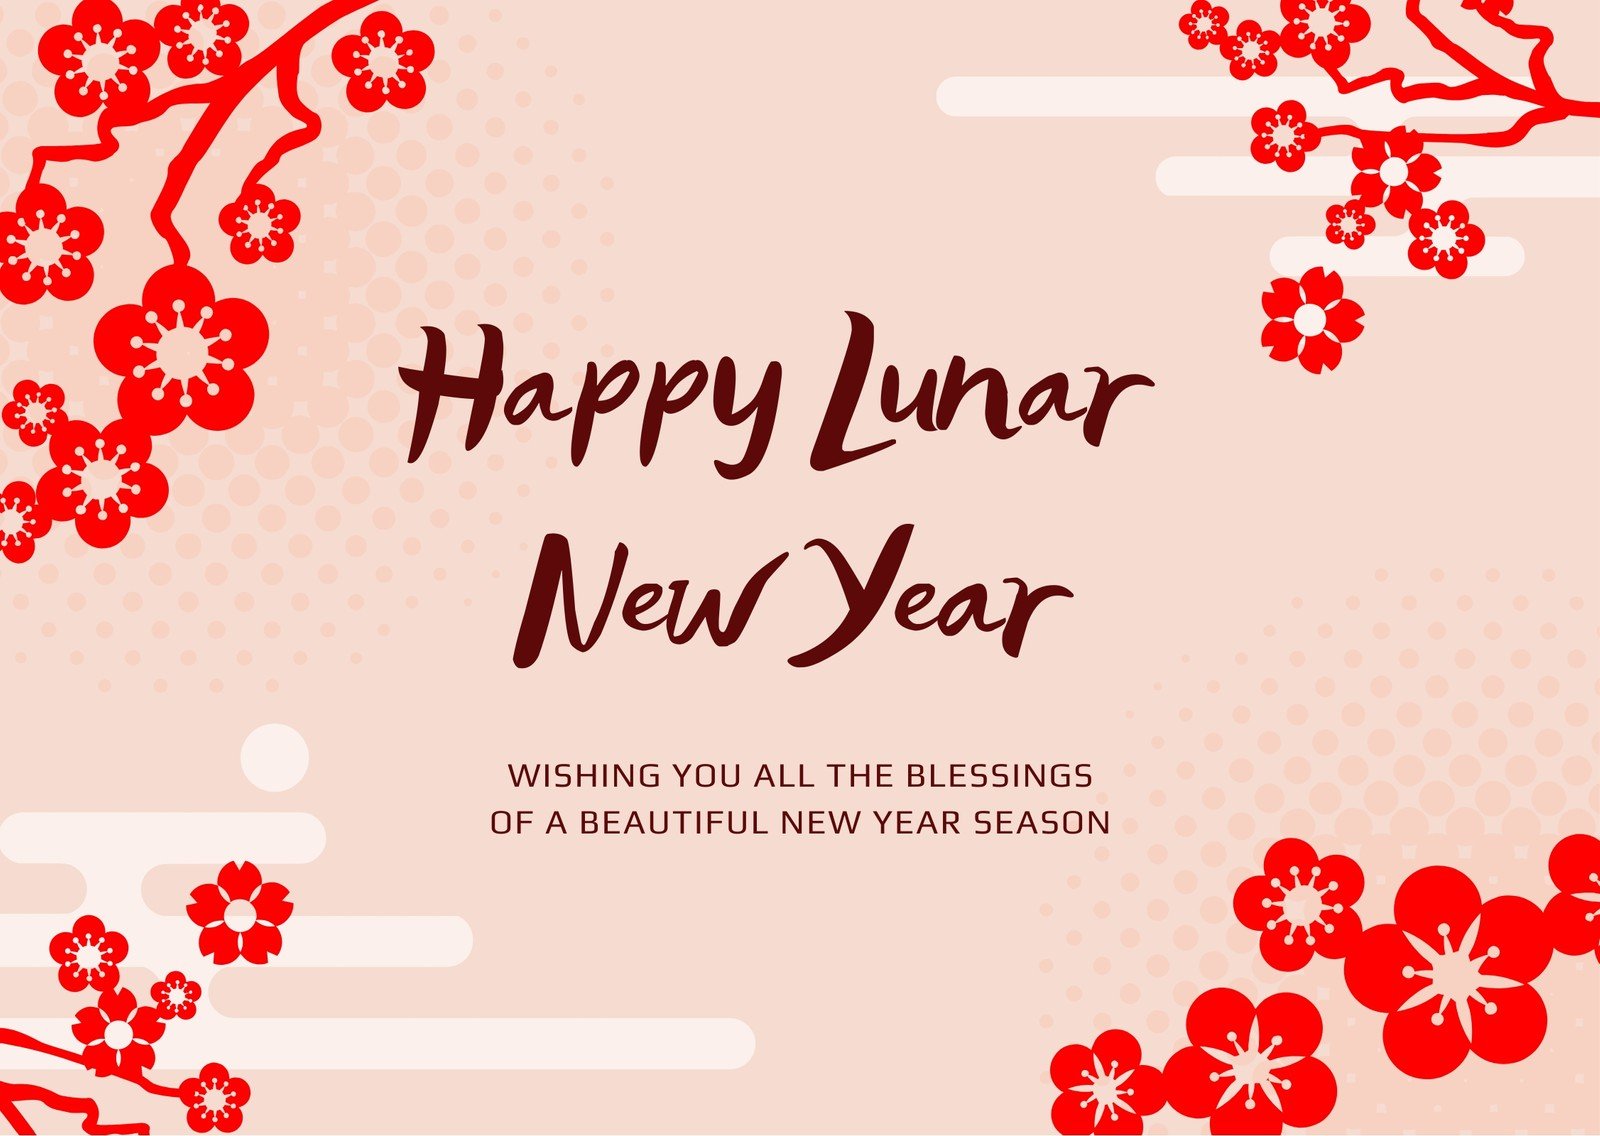 pink-and-red-floral-lunar-new-year-card-templates-by-canva